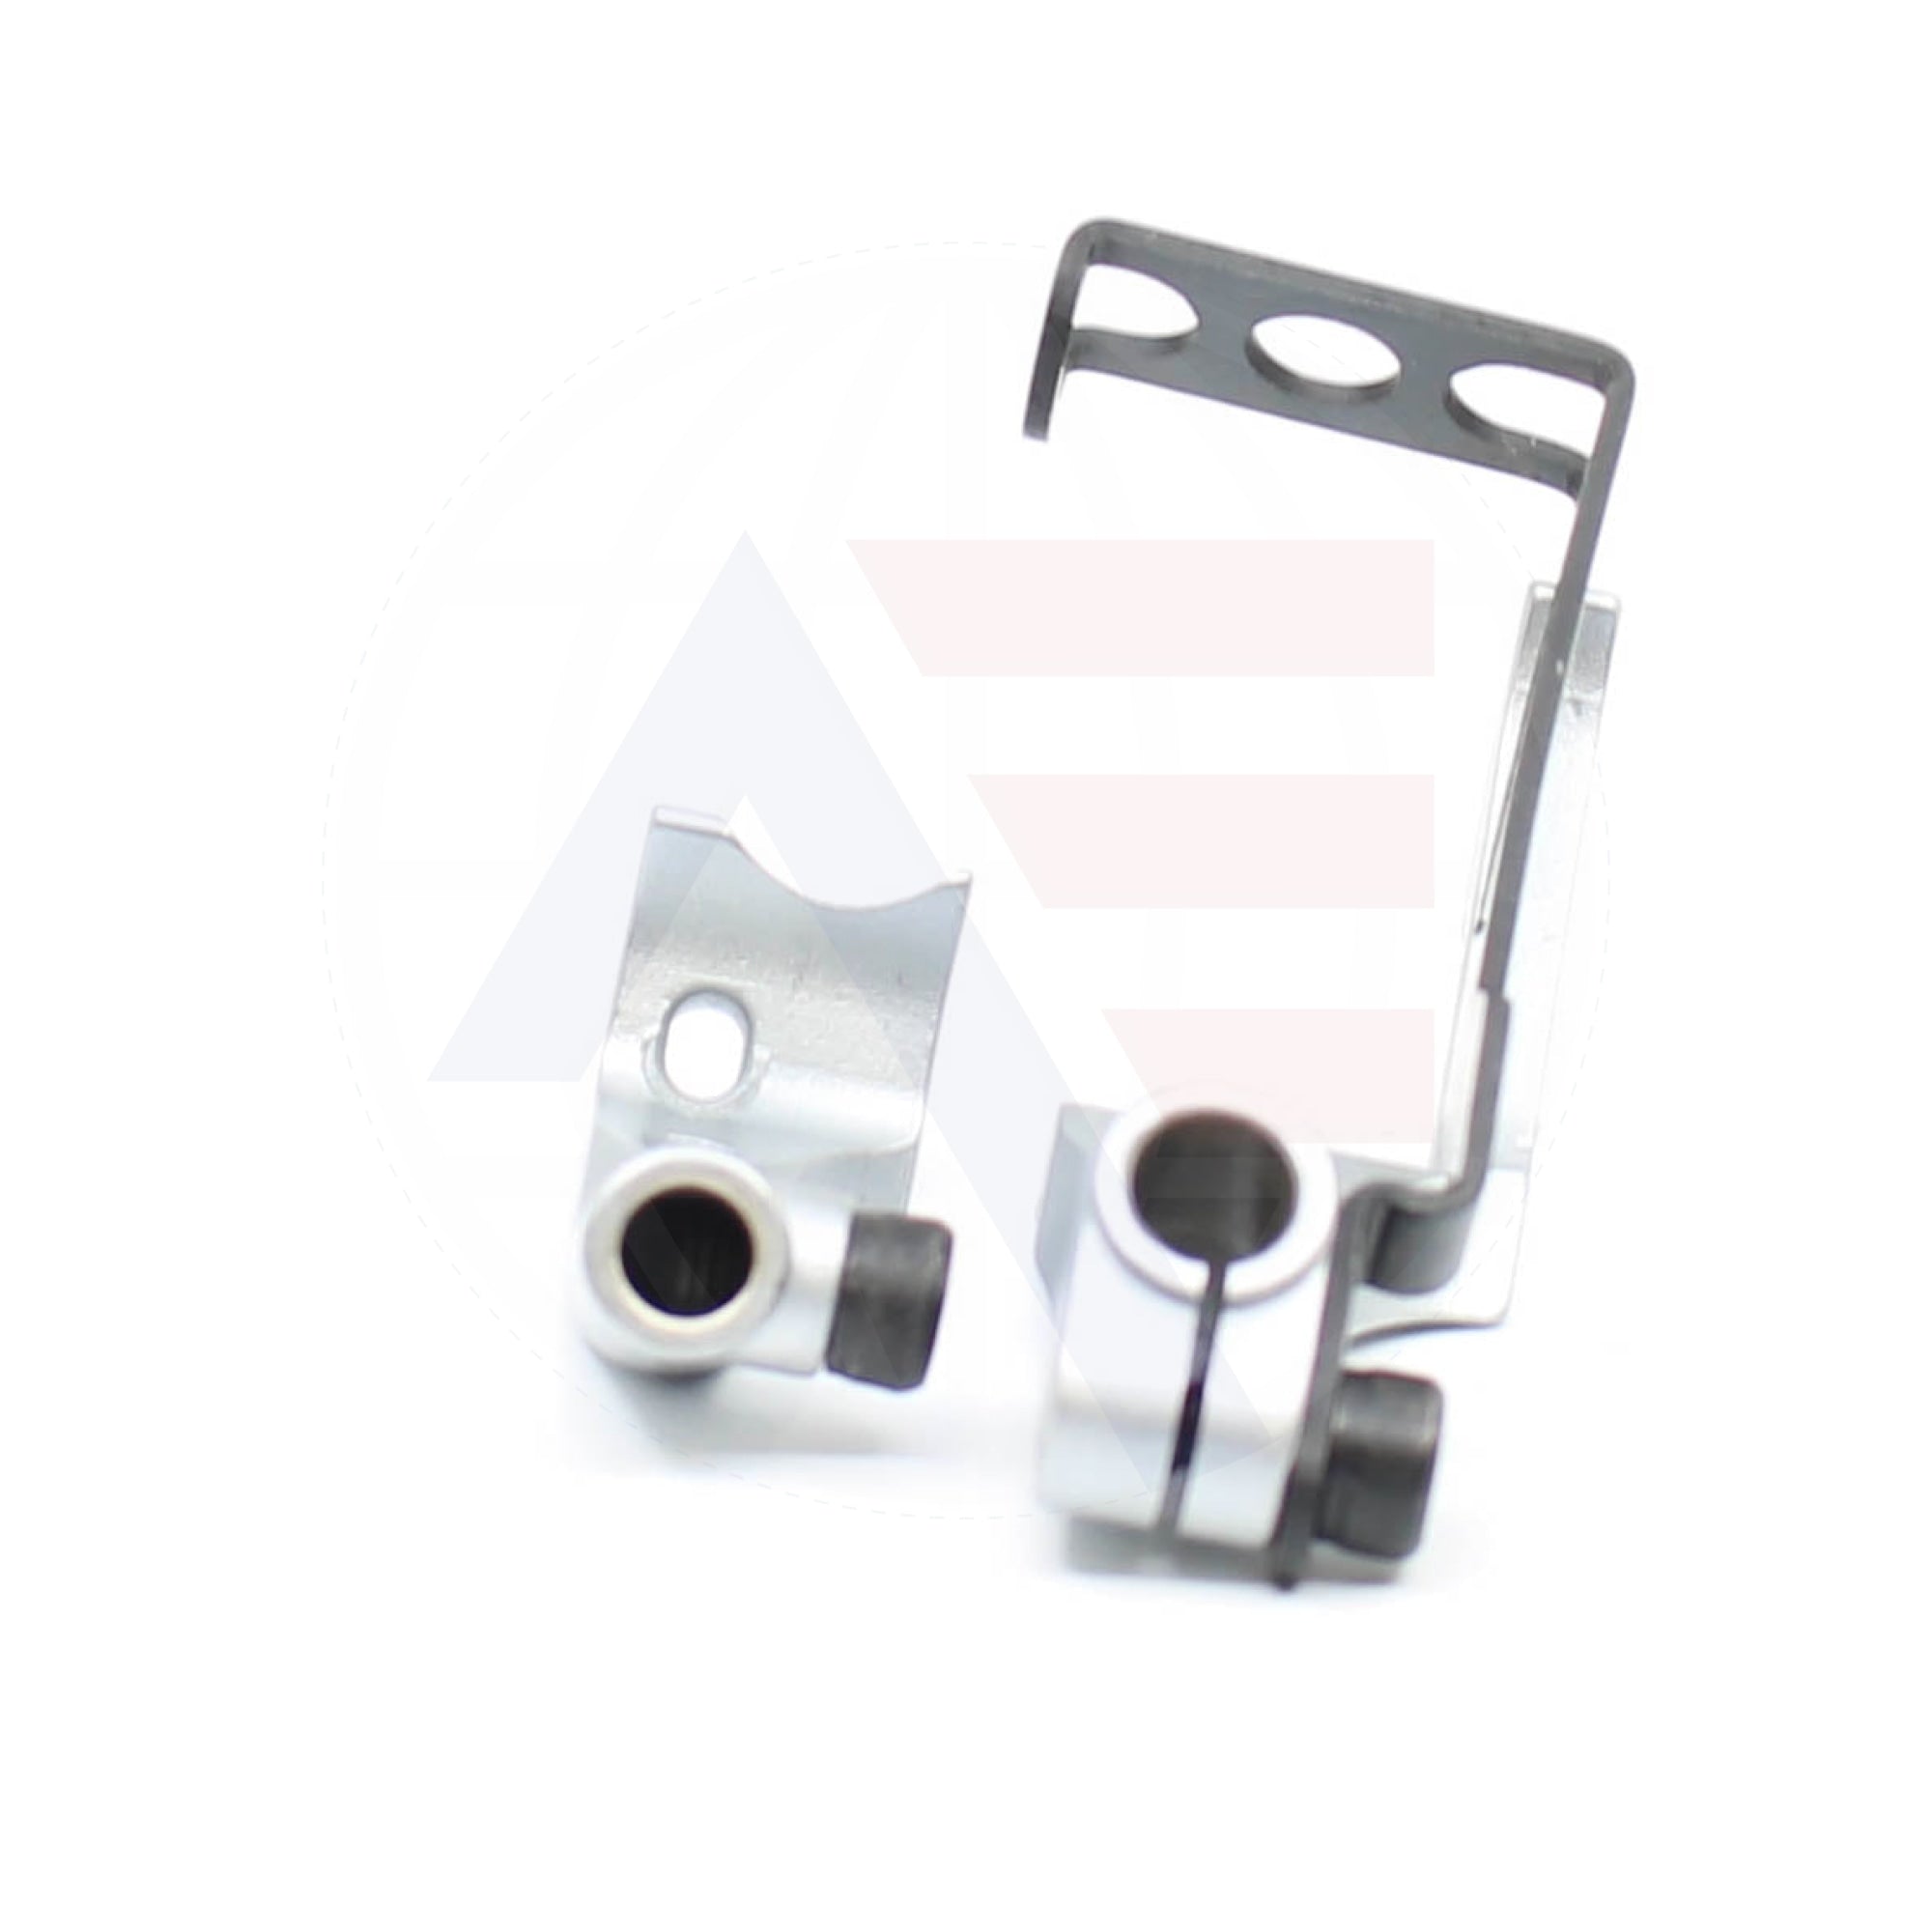 Kh367X6 Piping Foot Set Sewing Machine Spare Parts